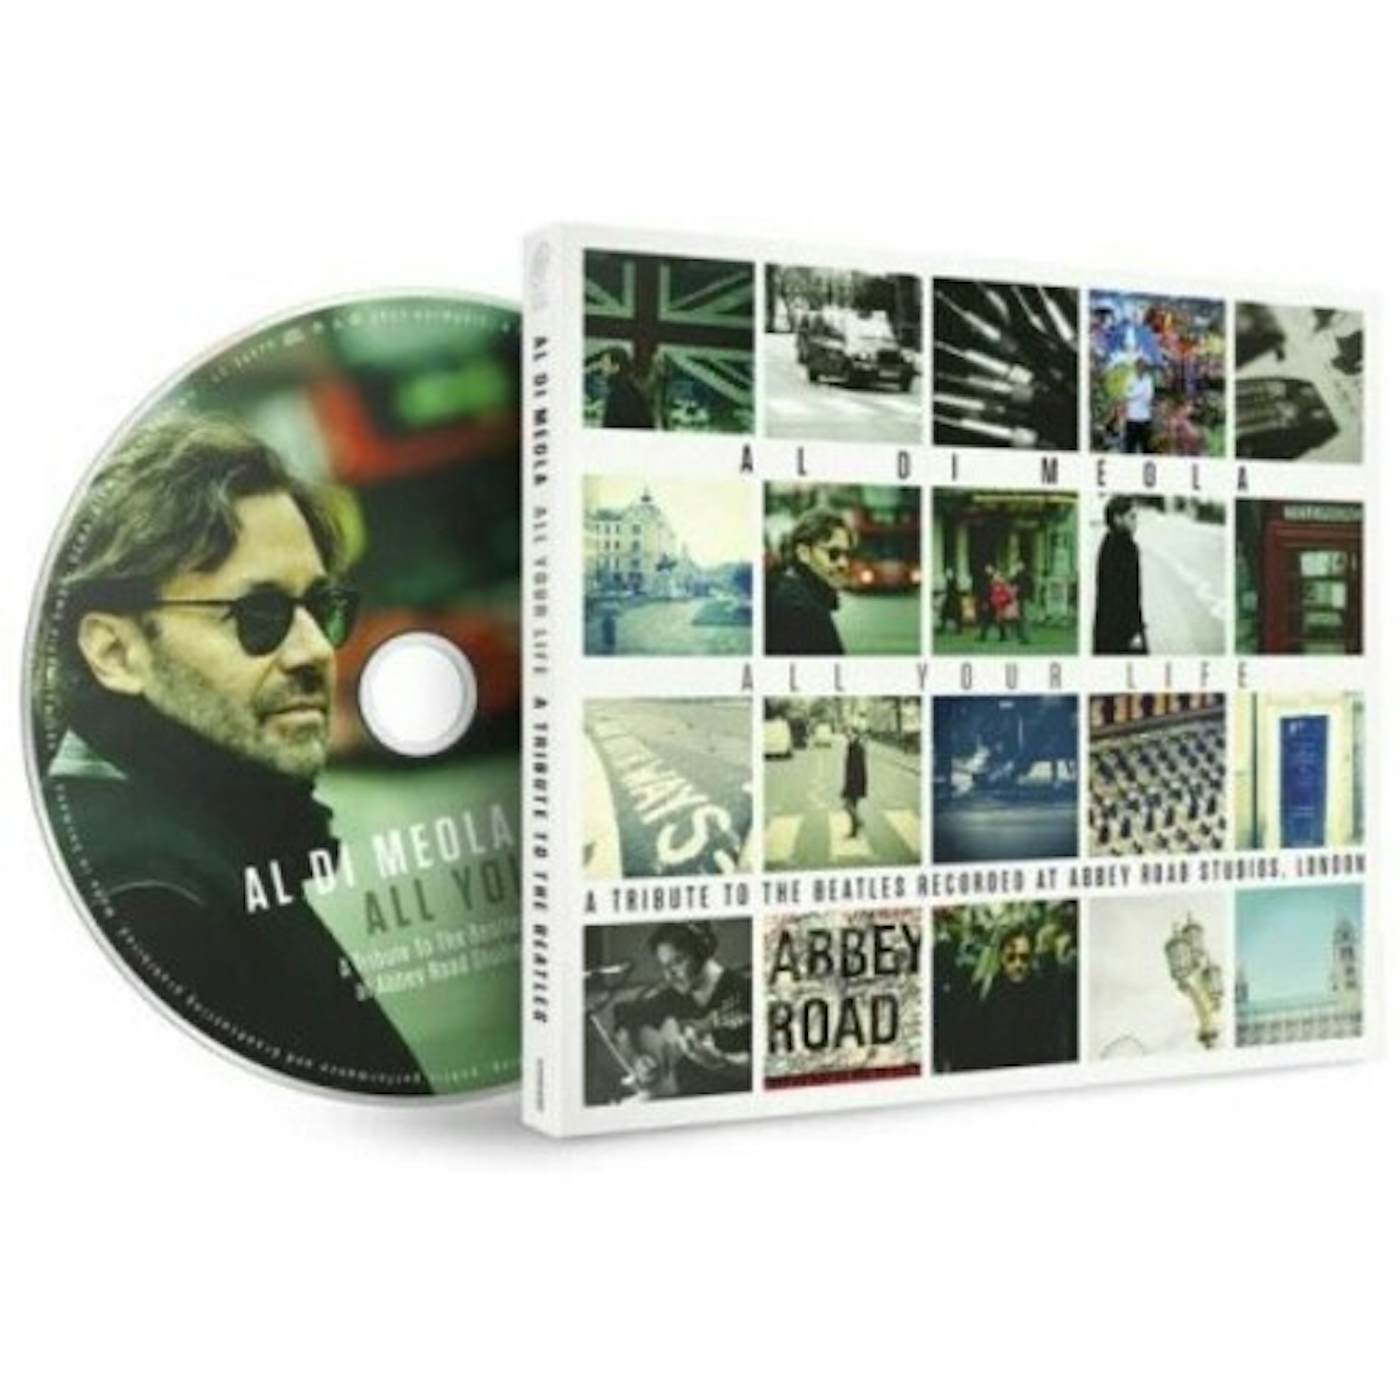 Al Di Meola ALL YOUR LIFE: A TRIBUTE TO THE BEATLES CD